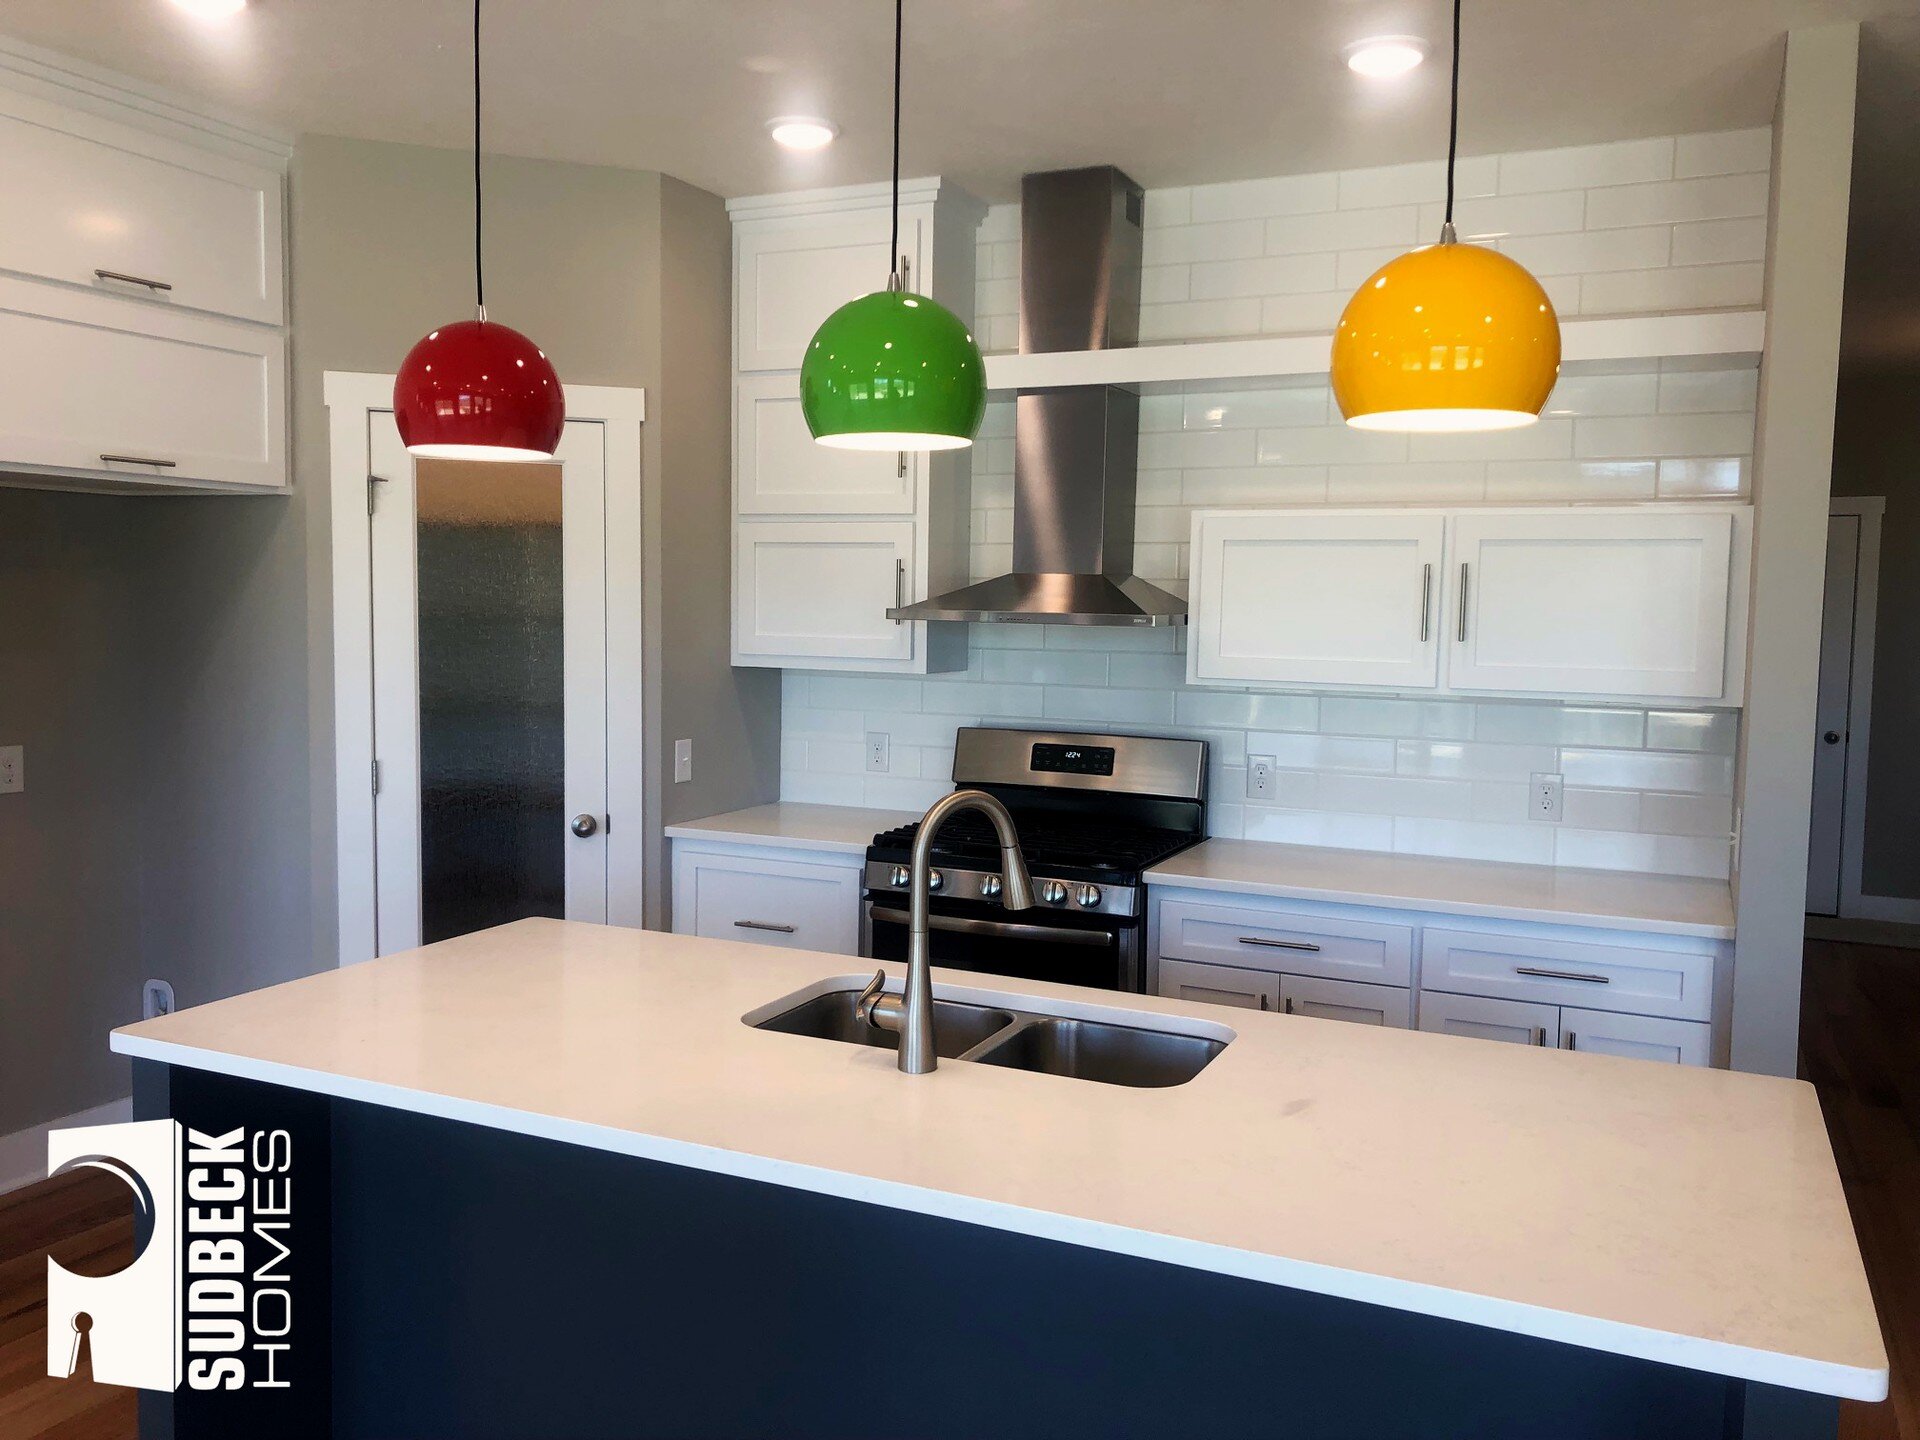 Another day, another fun kitchen! Great countertops with tons of space, along with the cabinets. The custom styling and placement of them throughout the kitchen give it a special look. Finally, we cannot forget to talk about those M&amp;M lights! SO 